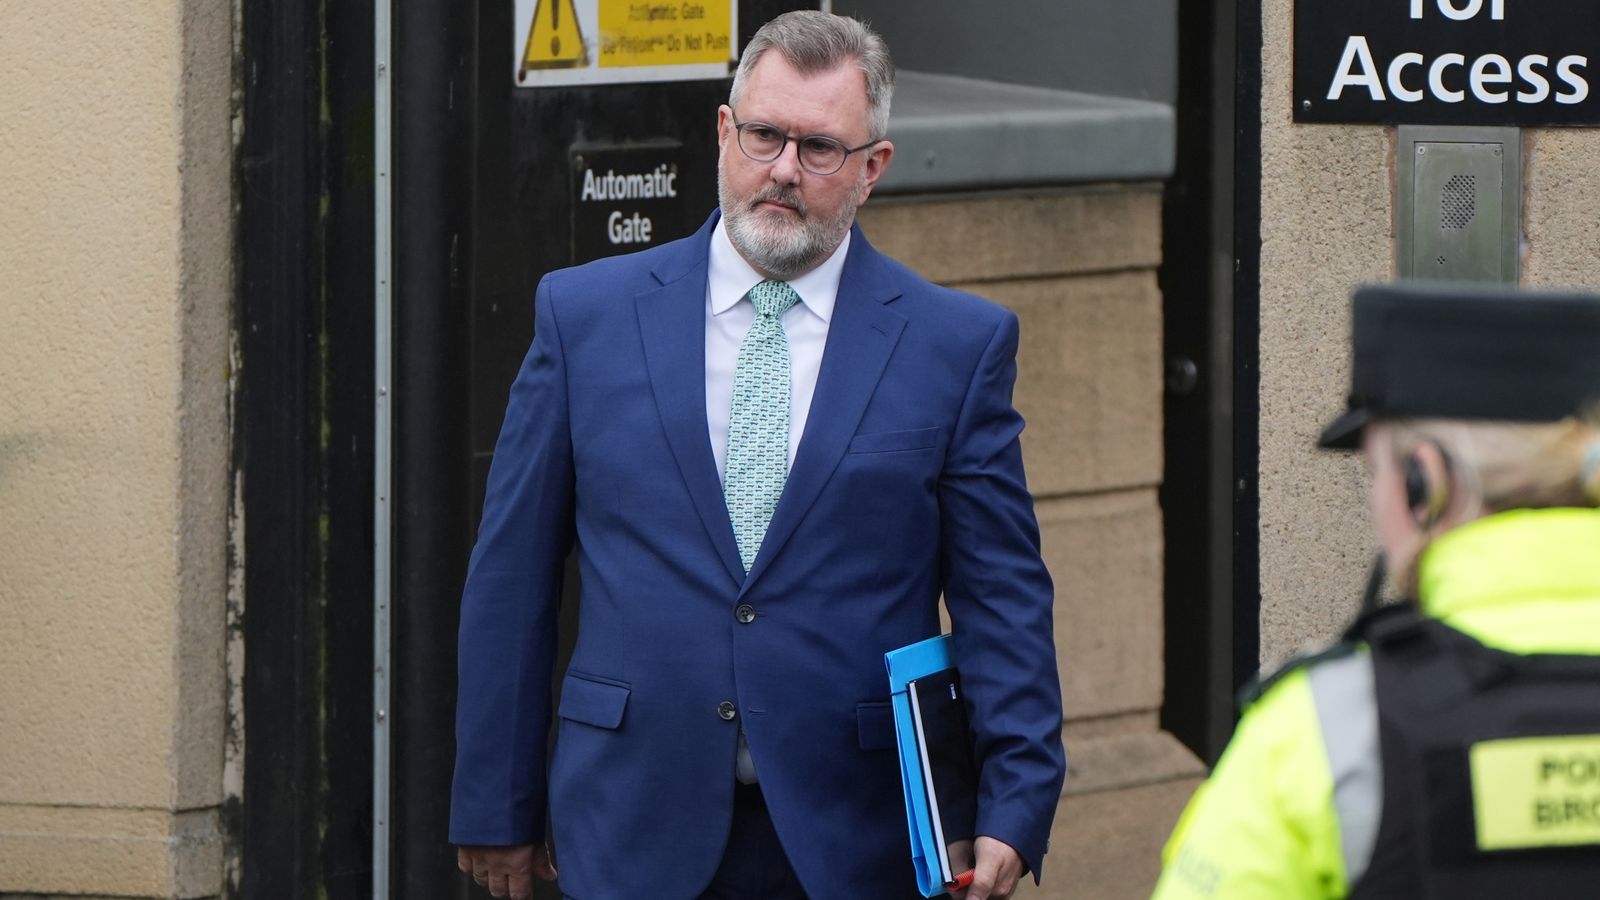 Ex-DUP leader Sir Jeffrey Donaldson to face trial over 18 sex offence allegations